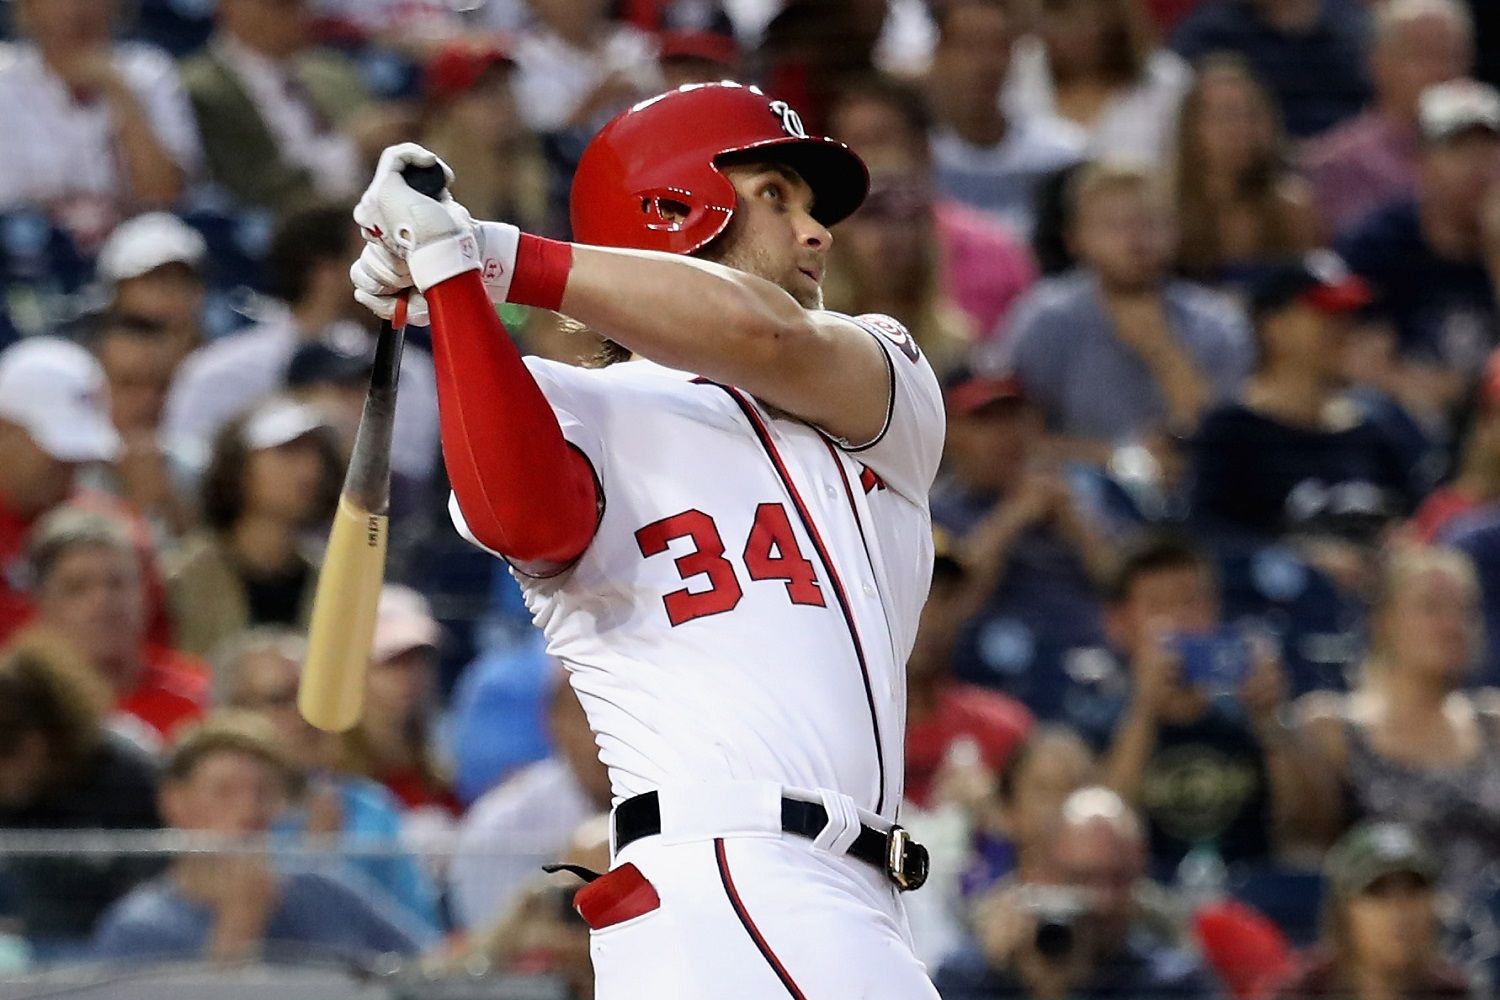 WASHINGTON, DC - AUGUST 07:  Bryce Harper #34 of the Washington Nationals follows his fourth inning solo home run against the Miami Marlins at Nationals Park on August 7, 2017 in Washington, DC.  (Photo by Rob Carr/Getty Images)